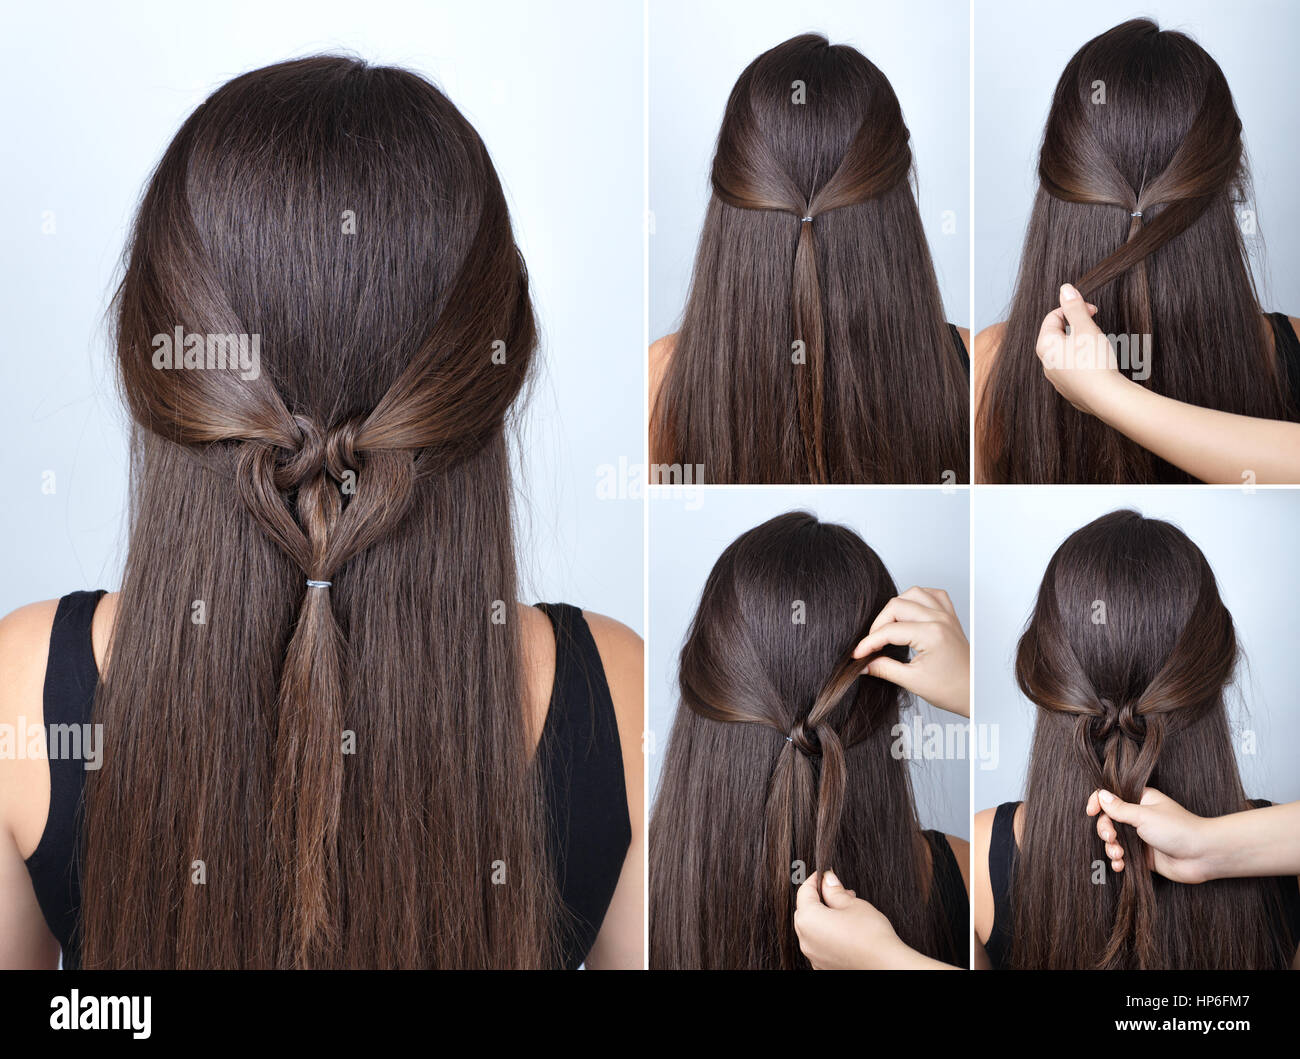 30 Simple and Easy Hairstyles for Straight Hair - Pretty Designs